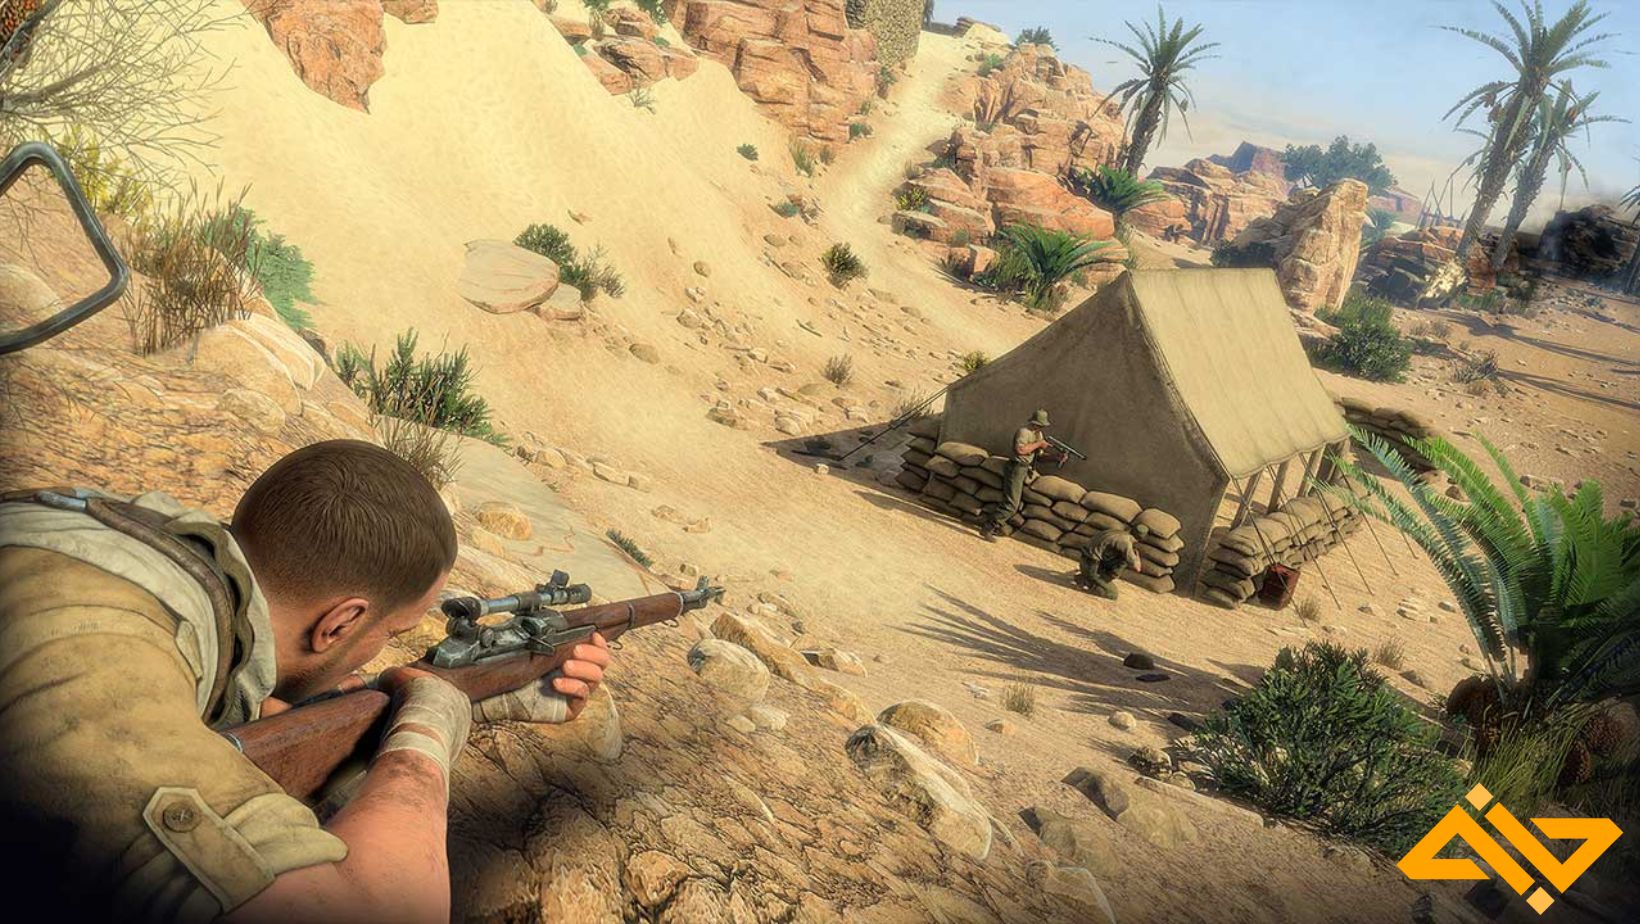 Sniper Elite 3 is an amazing sniping game that focuses on the North African conflict.